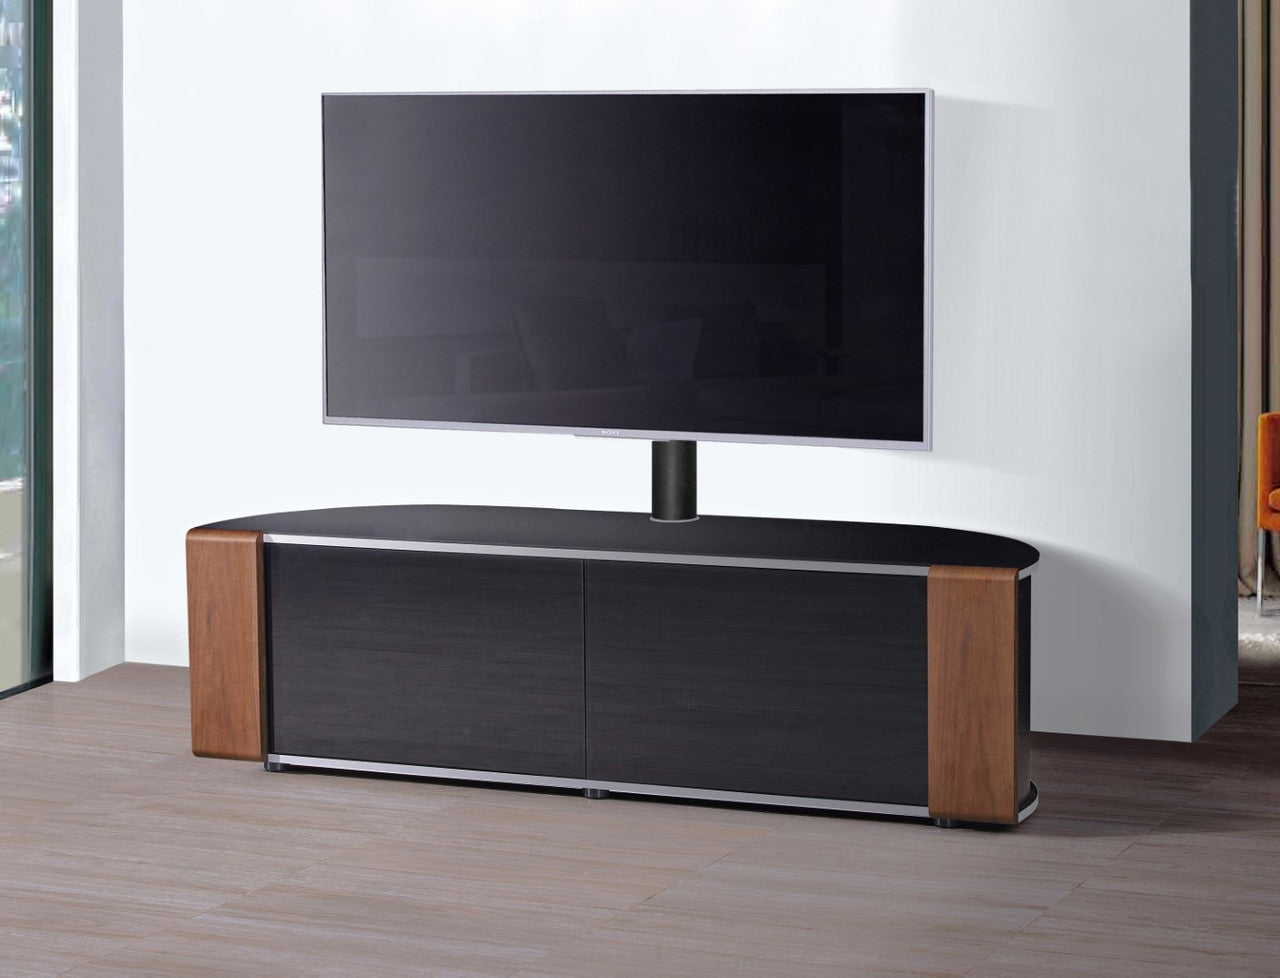 SIRIUS 1600 TV unit for tvs upto 70 inches with screen mounting system with oak/walnut trim